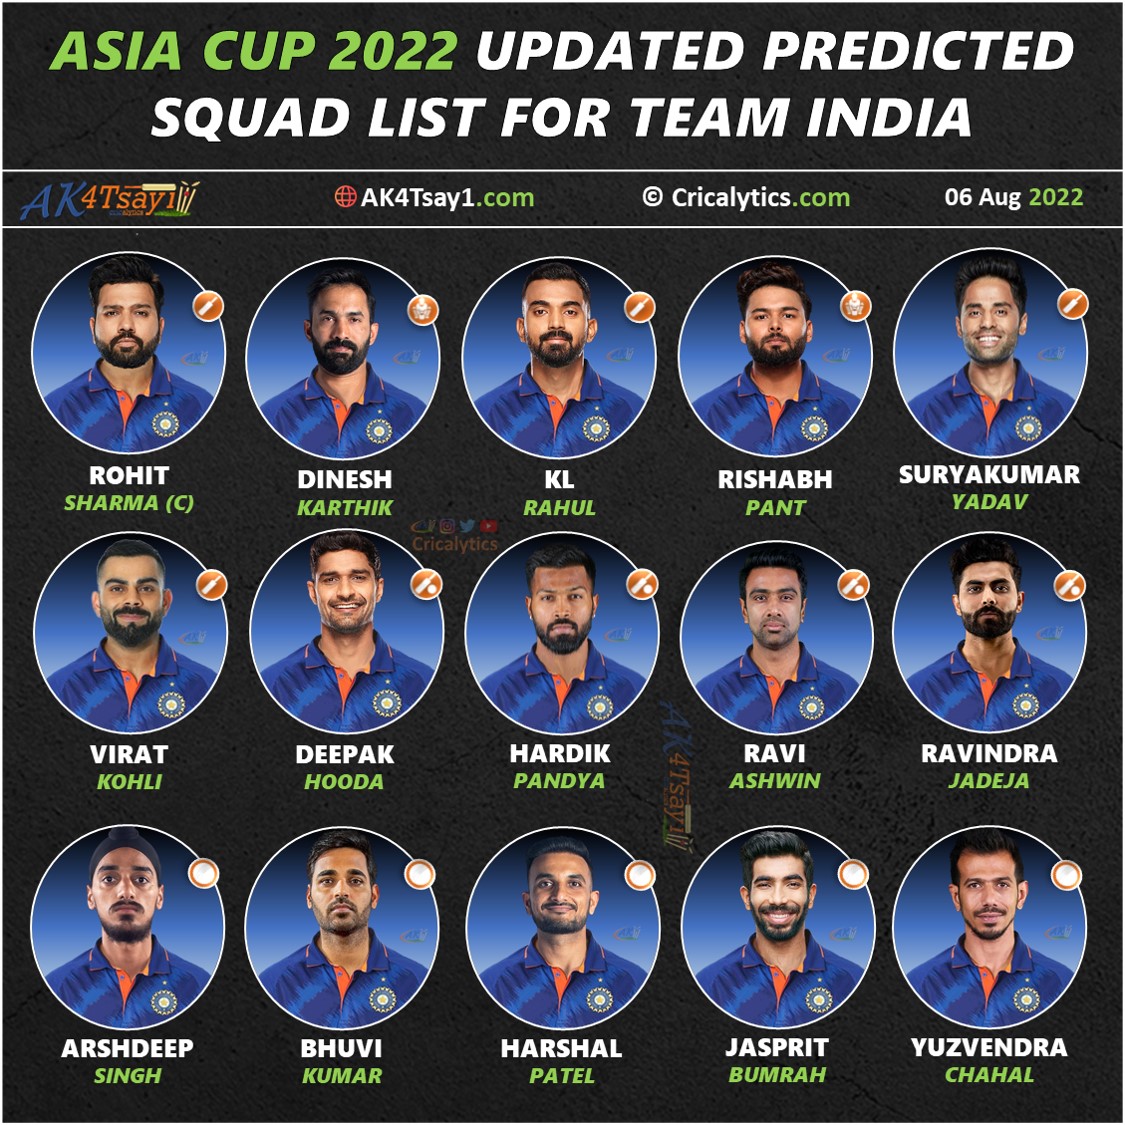 Exclusive Asia Cup 2022 Confirmed 15 Players Squad List for Team India